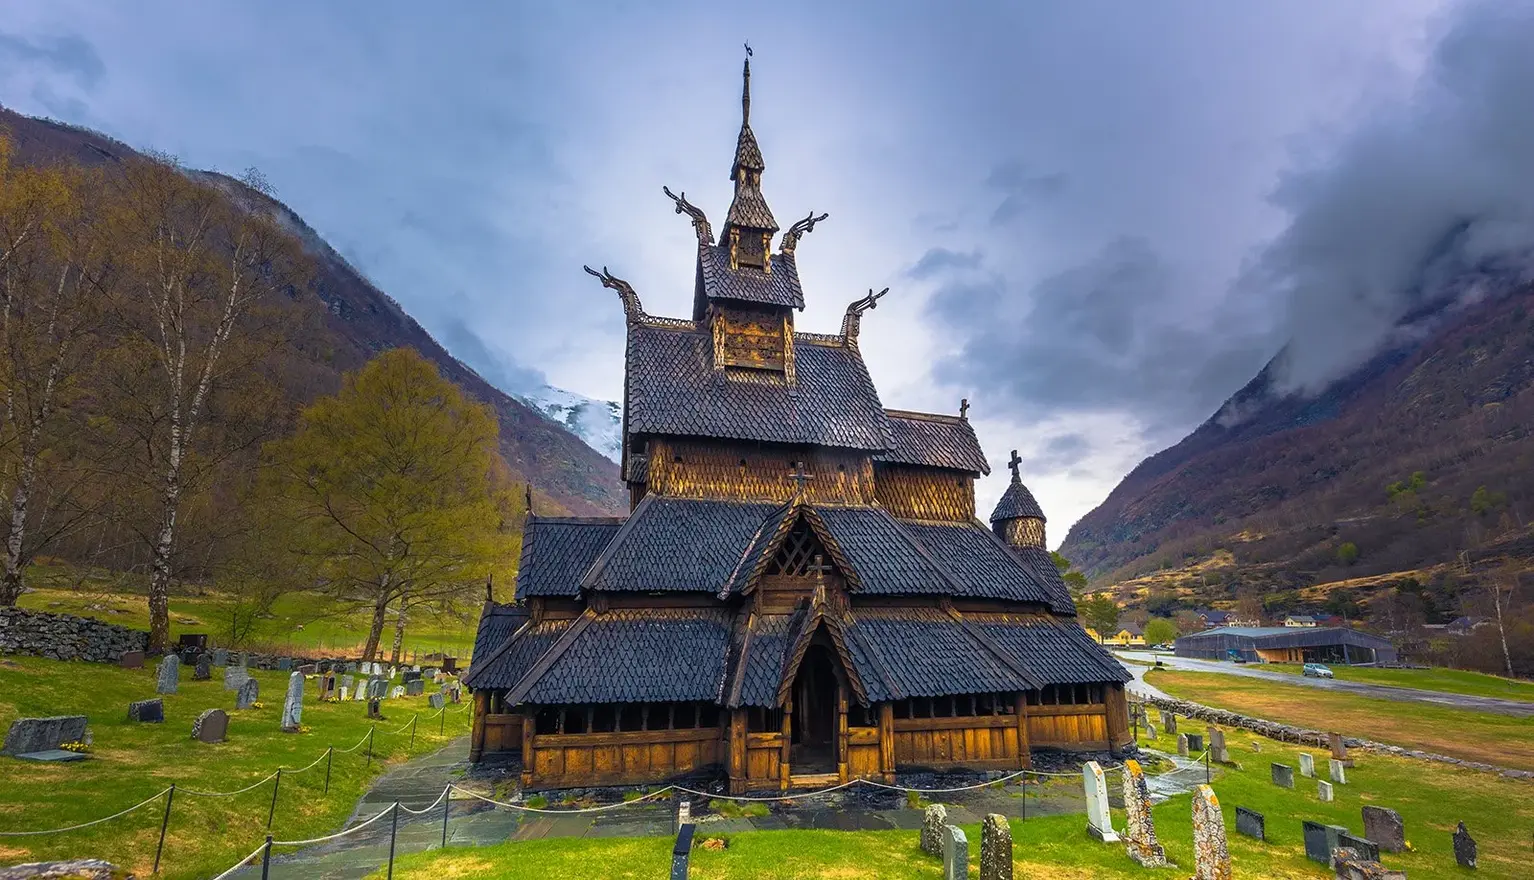 Enchanting Fairy-tale Destinations in Europe